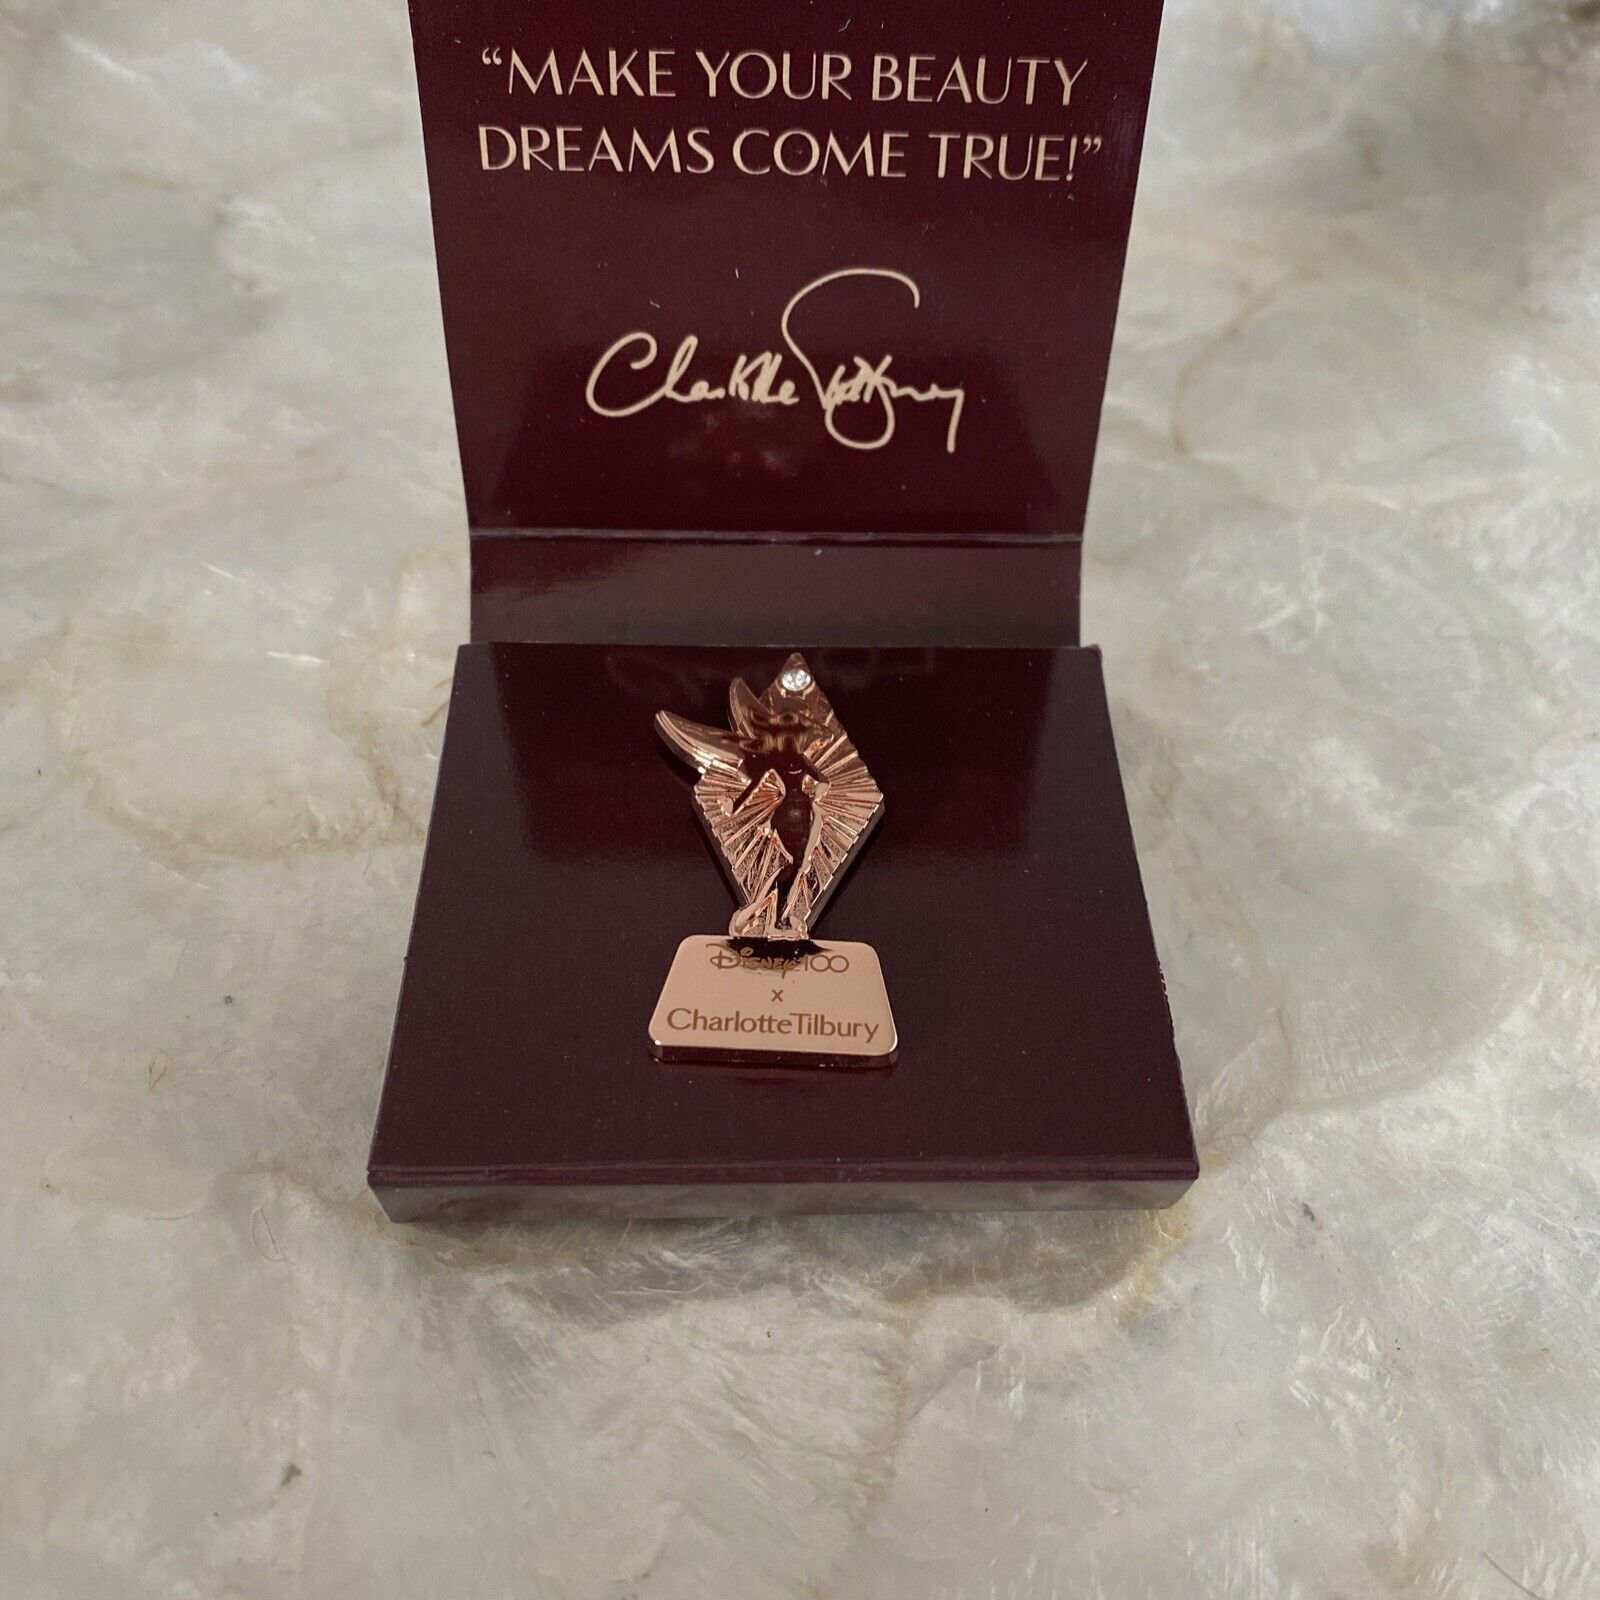 NEW CHARLOTTE TILBURY EXCLUSIVE LIMITED COLLECTORS’ TINKER BELL PIN 3 MAGIC